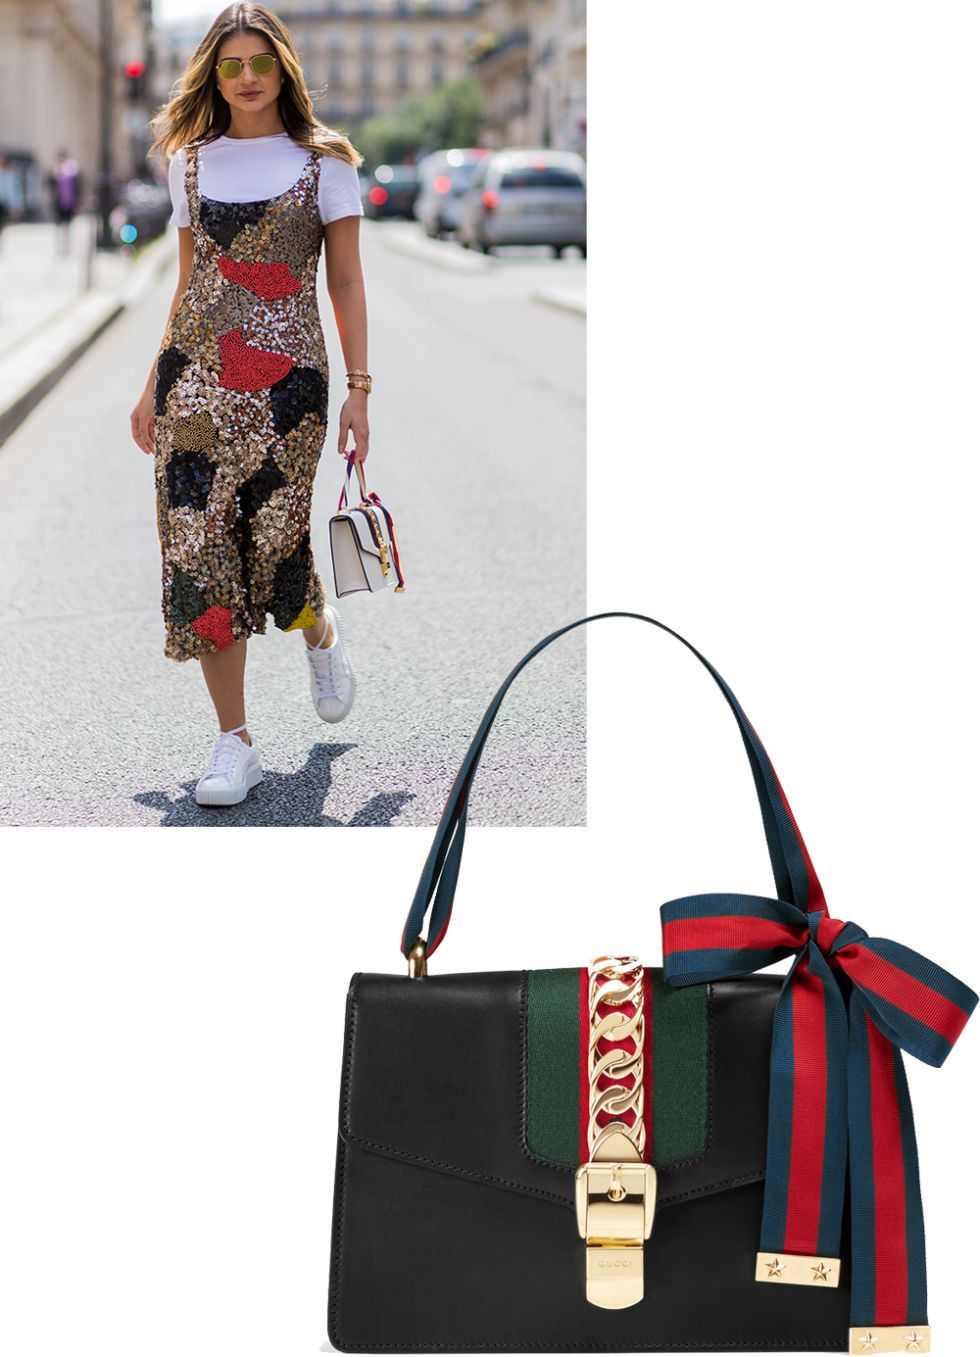 <p>Ladylike is a byword of the season, and Gucci's bow-embellished bag is a must-have. </p><p><br></p><p>Gucci bag, $2,490, <a href="https://shop.harpersbazaar.com/designers/g/gucci/sylvie-leather-shoulder-bag-black-9582.html" target="_blank">shopBAZAAR.com</a>.</p>